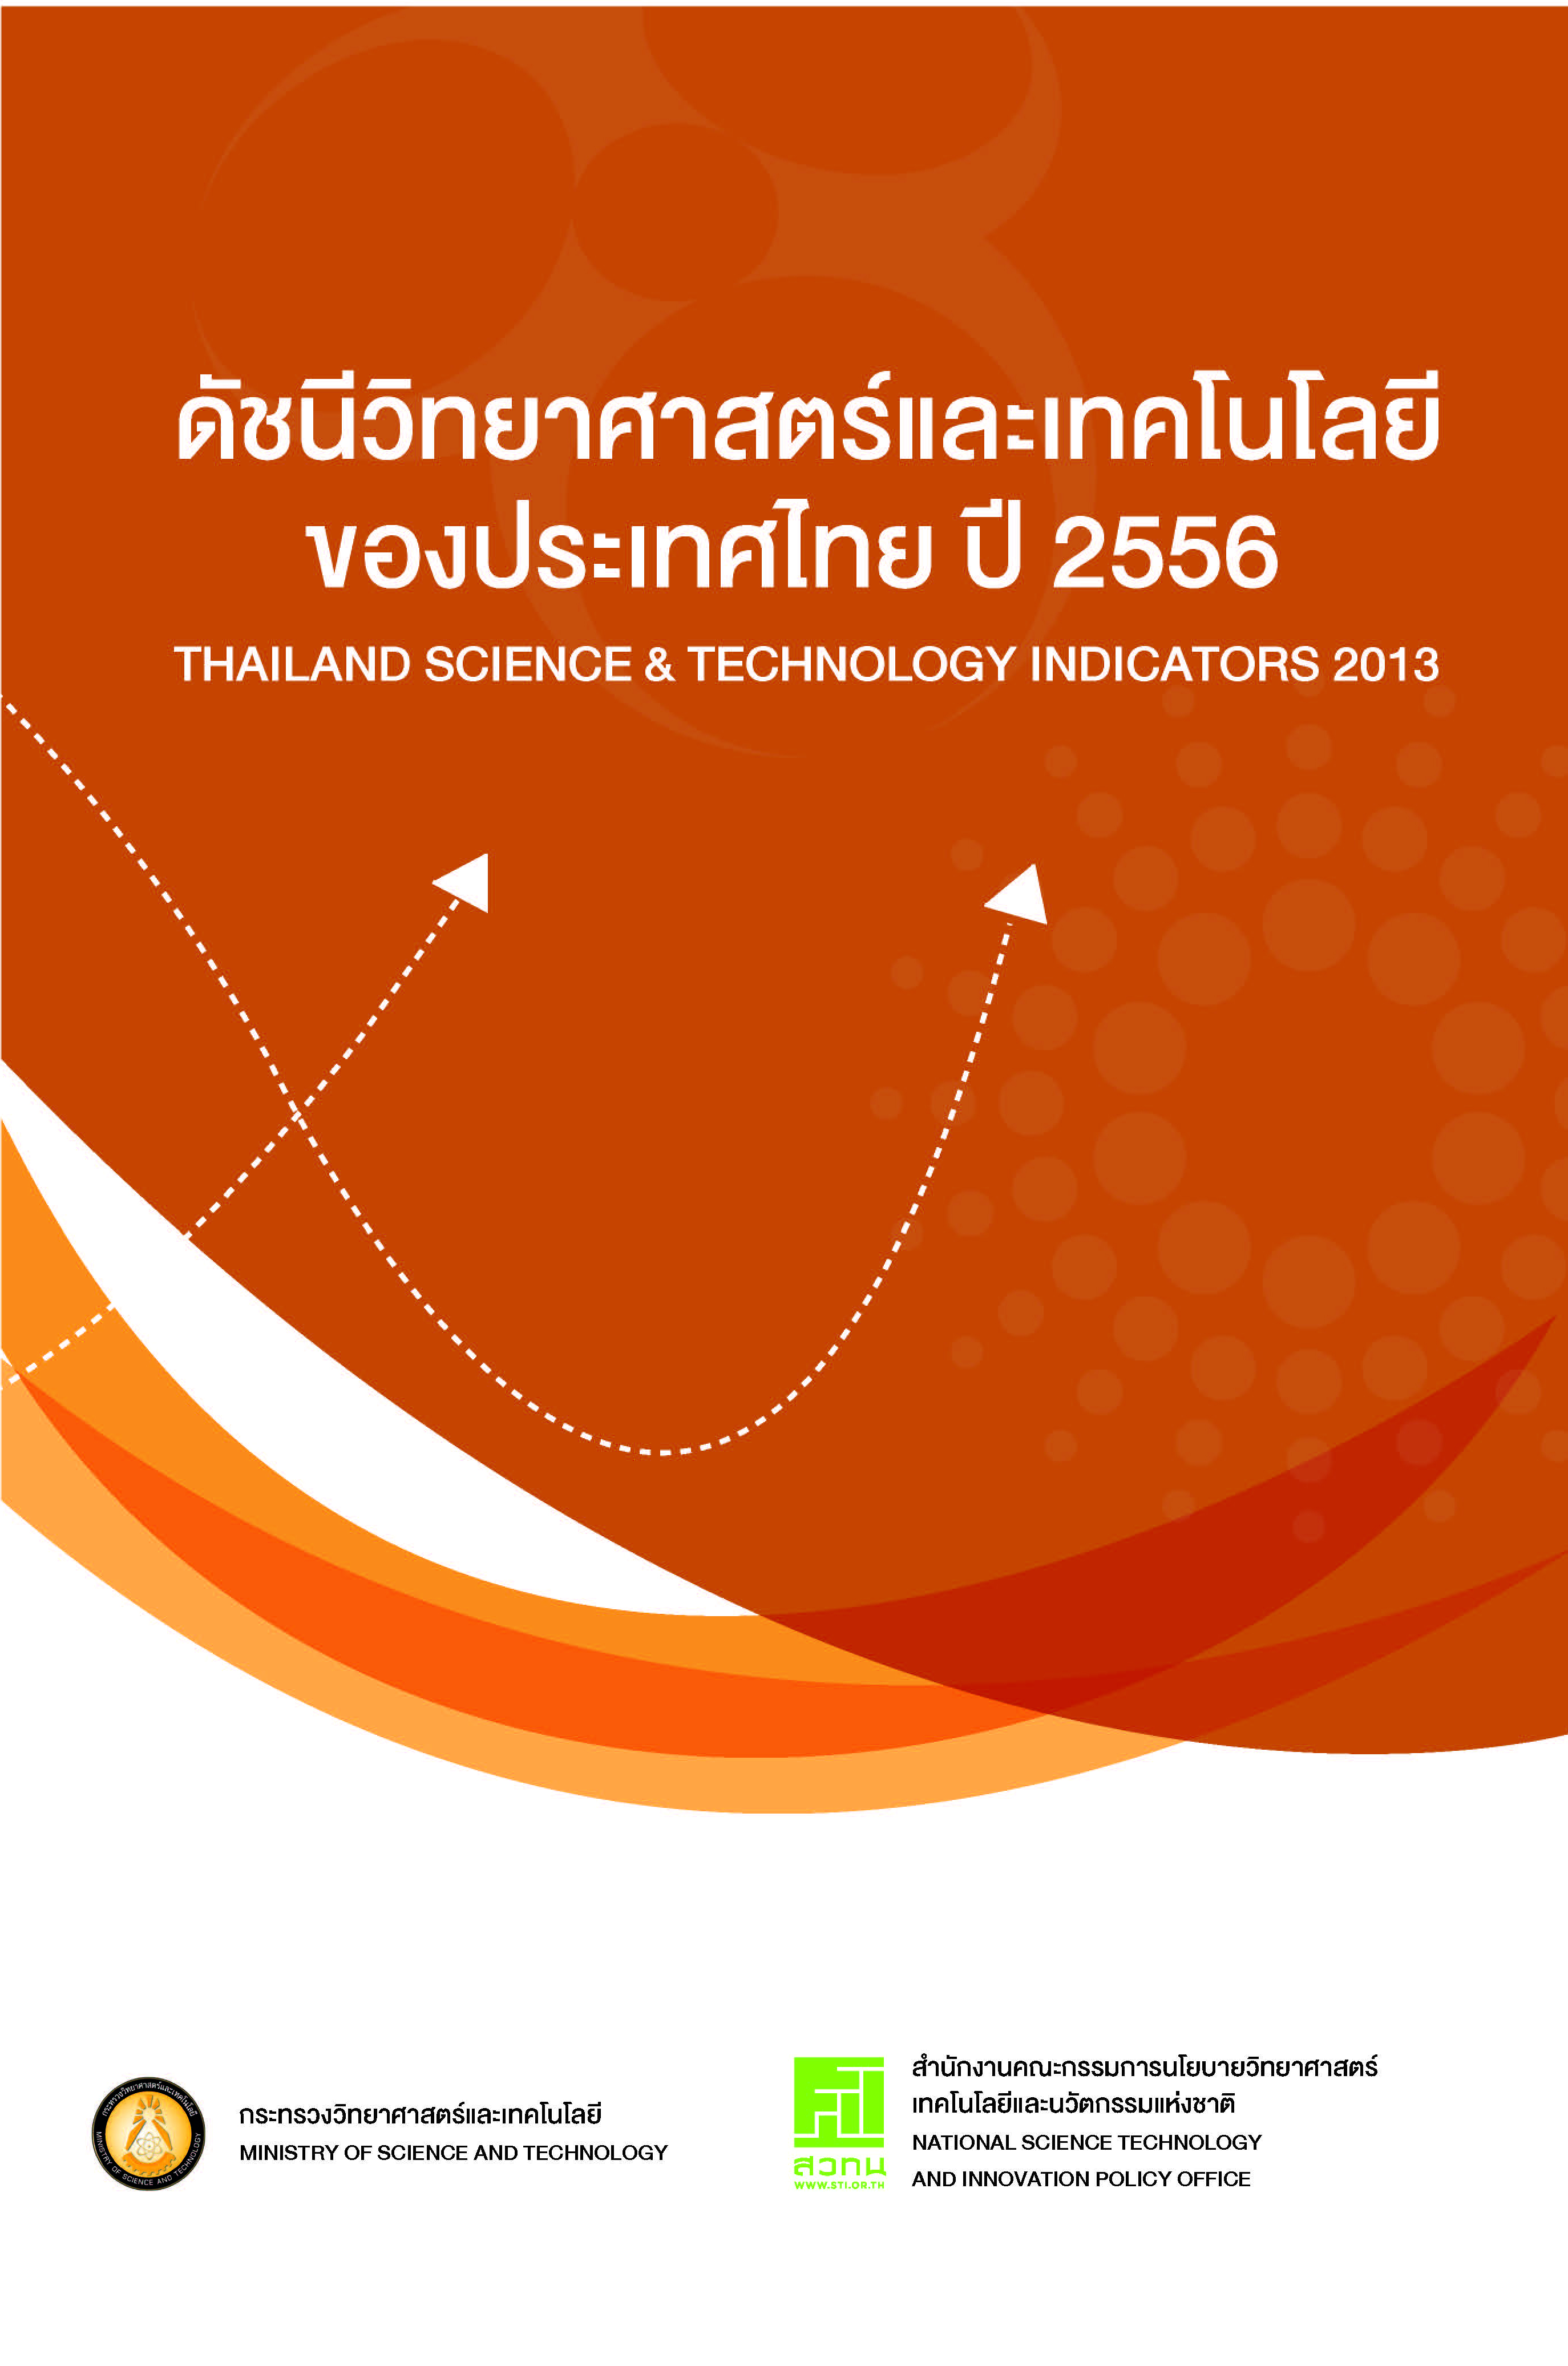 uploads/magazine/cover/Index-of-Science-and-TechnologyThailand-2013-2556.jpg